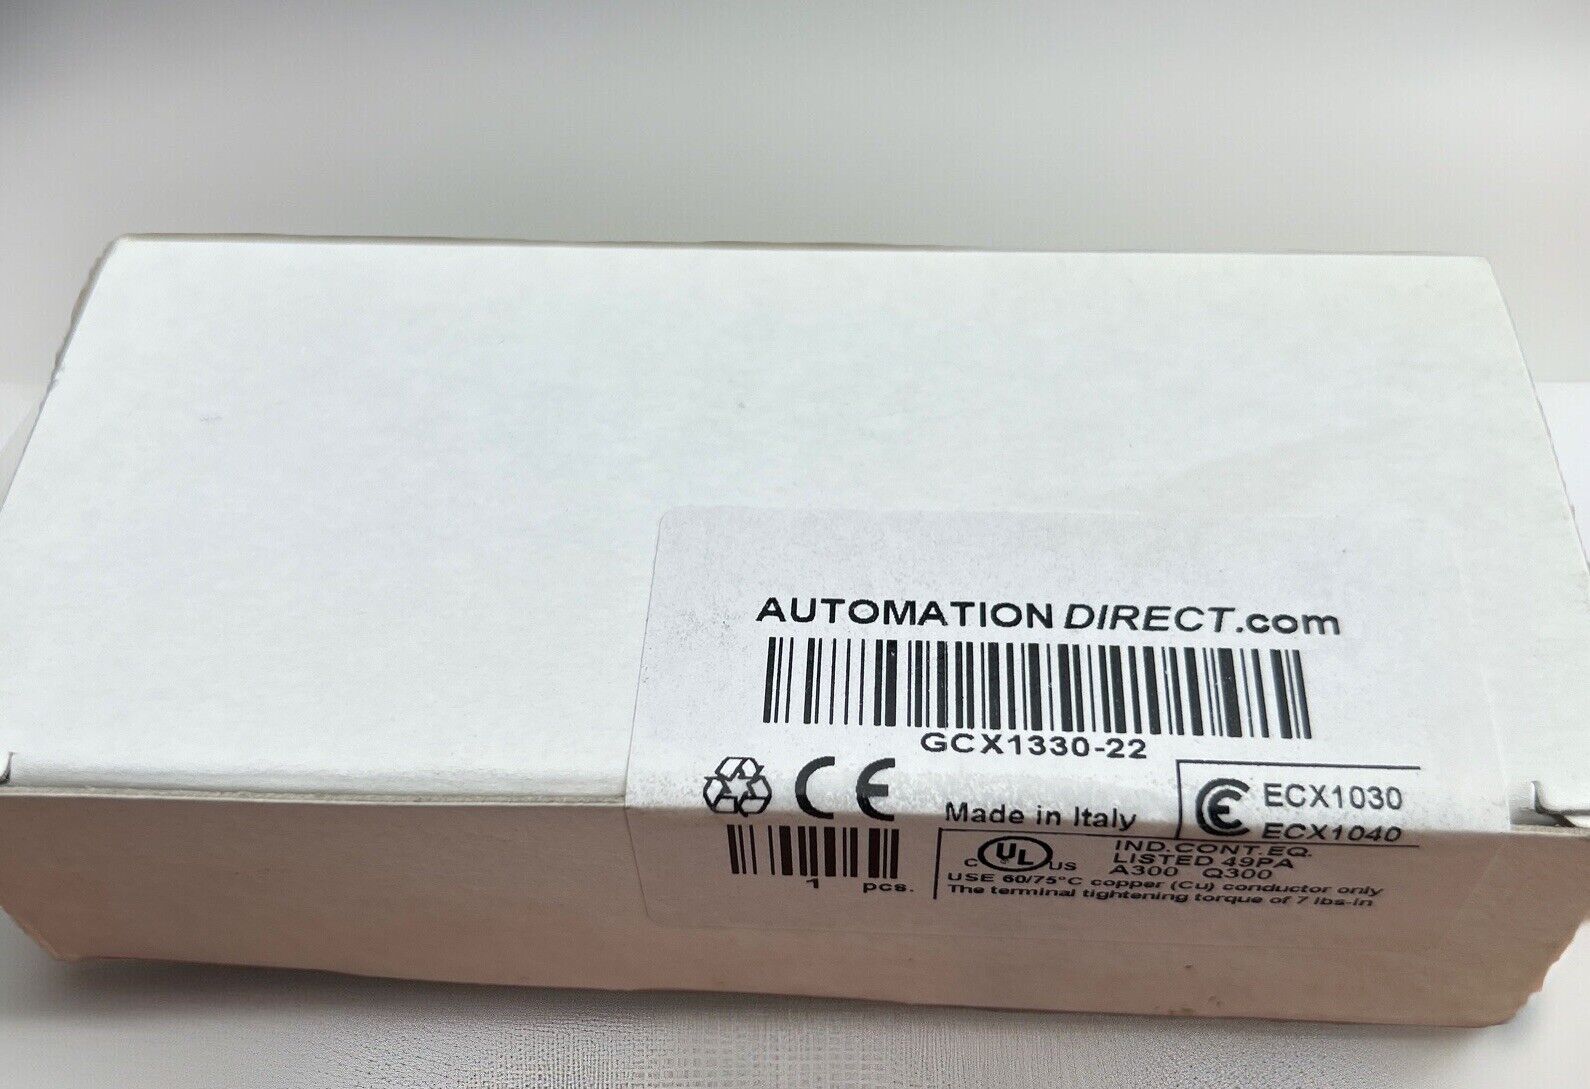 NEW AUTOMATION DIRECT GCX1330-22 SELECTOR SWITCH.     D4